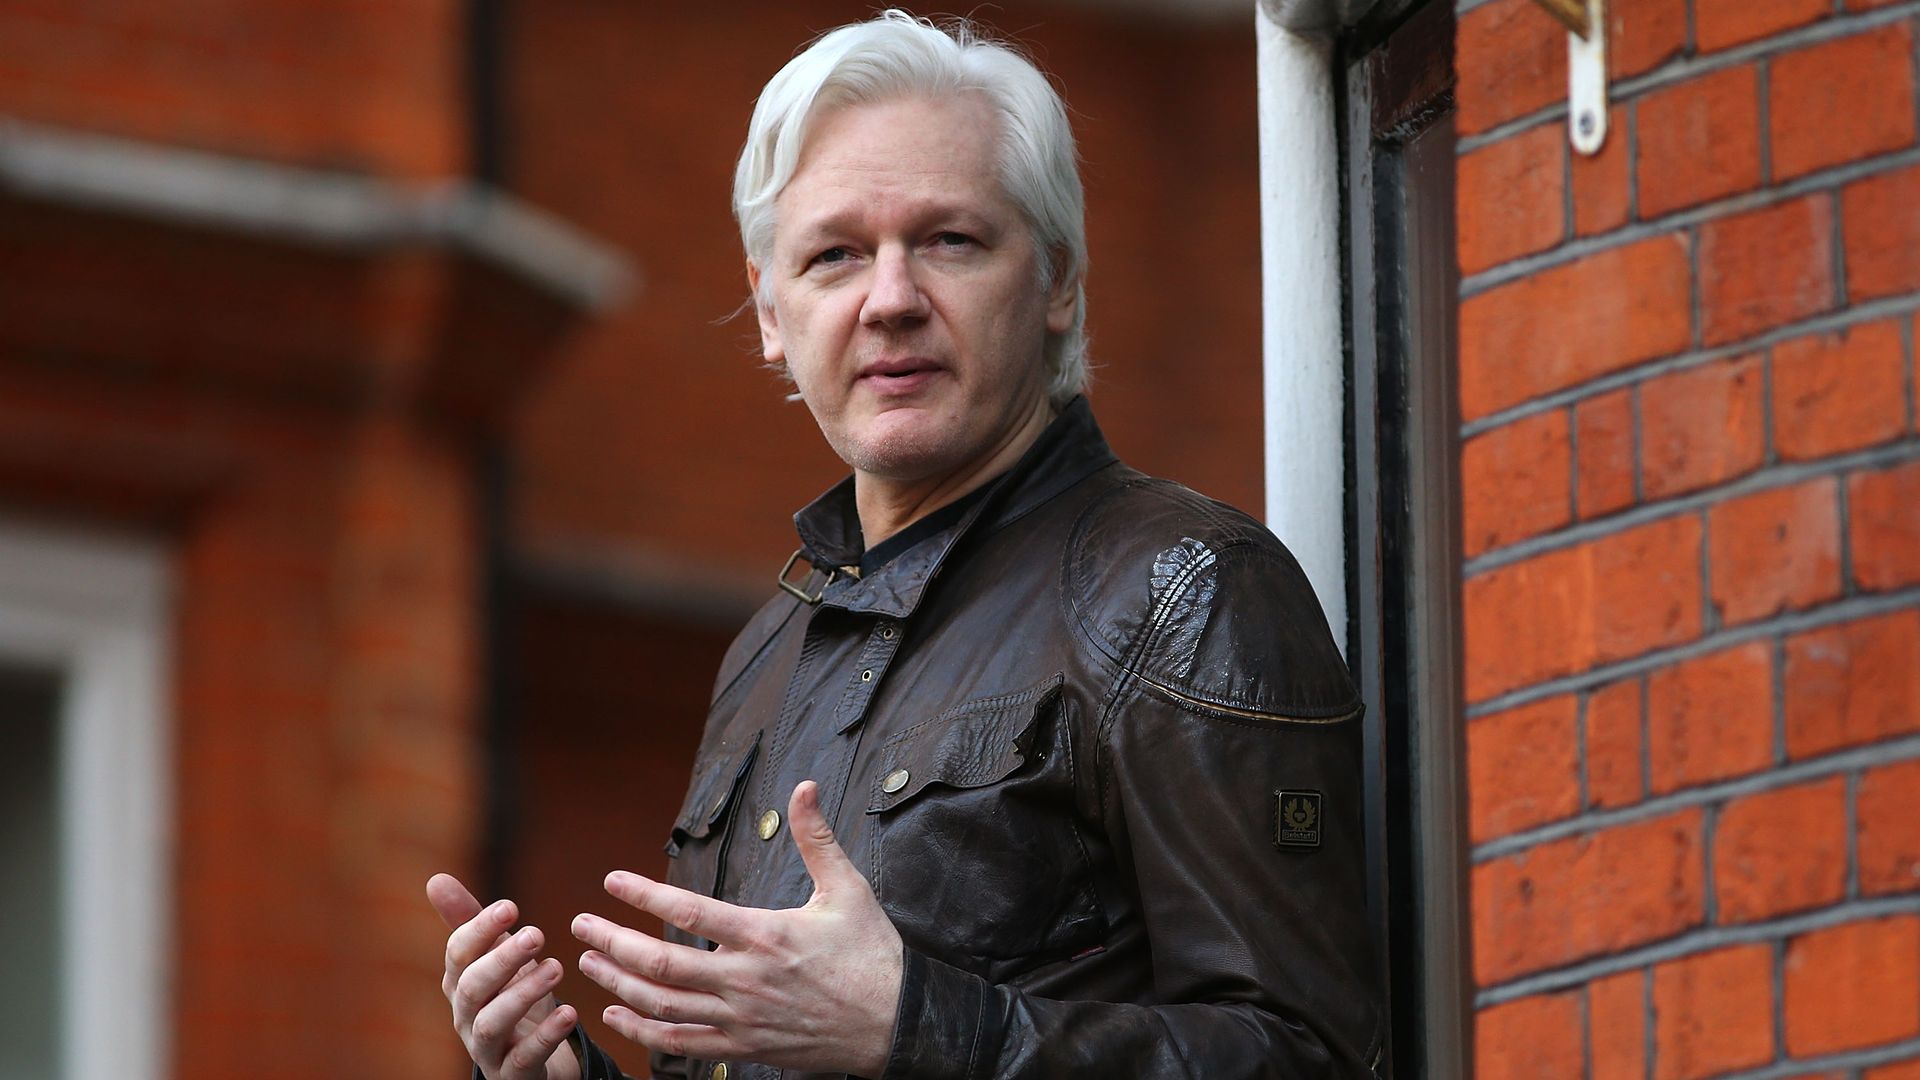 Julian Assange speaks to the media from the balcony of the Ecuador's embassy in London in May 2017.